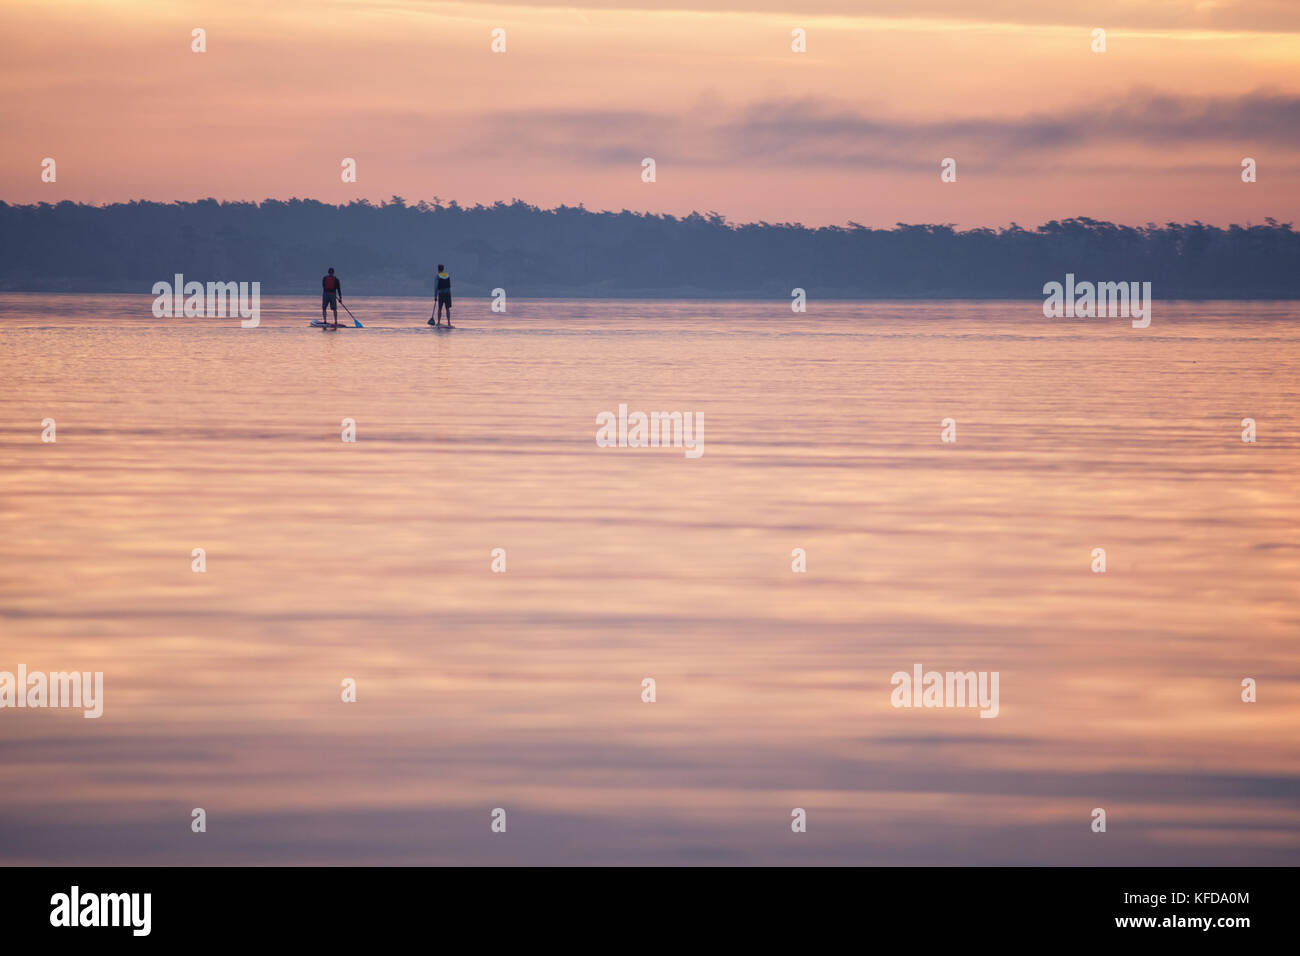 Early morning Paddle Boarders at Willows Beach, Victoria BC Canada Stock Photo